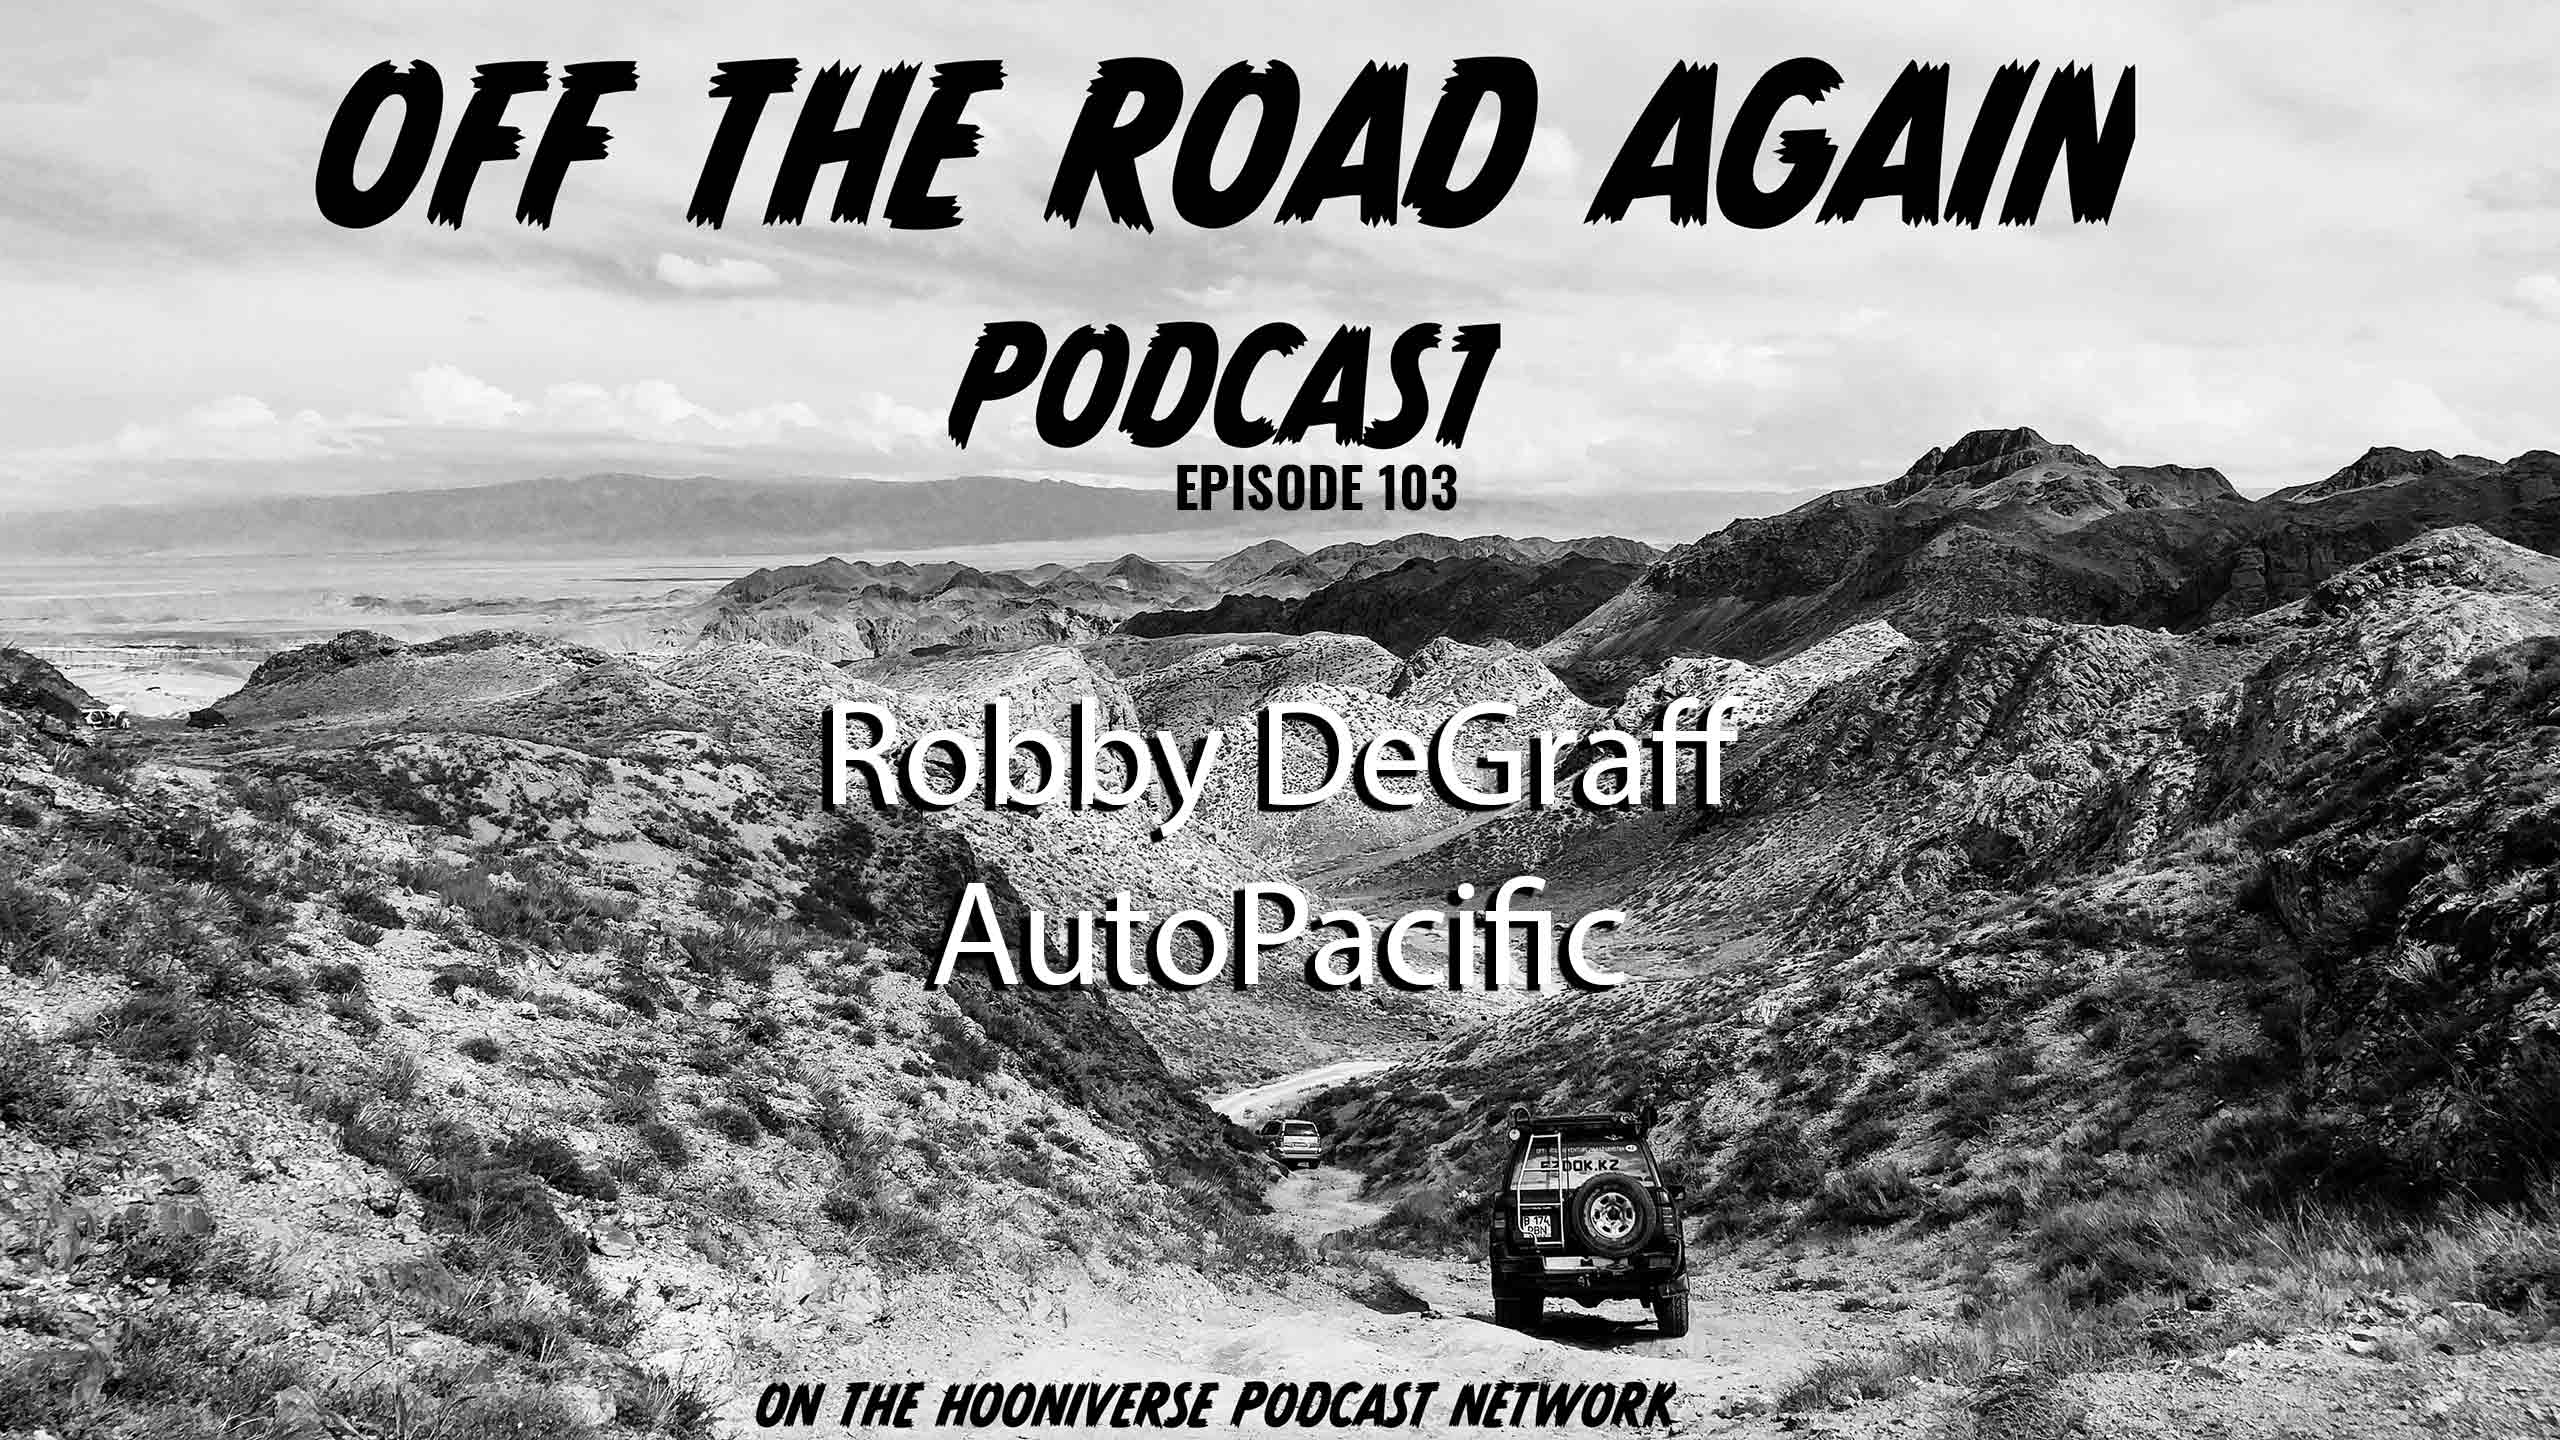 Robby-DeGraff-AutoPacific-Off-The-Road-Again-Episode-103